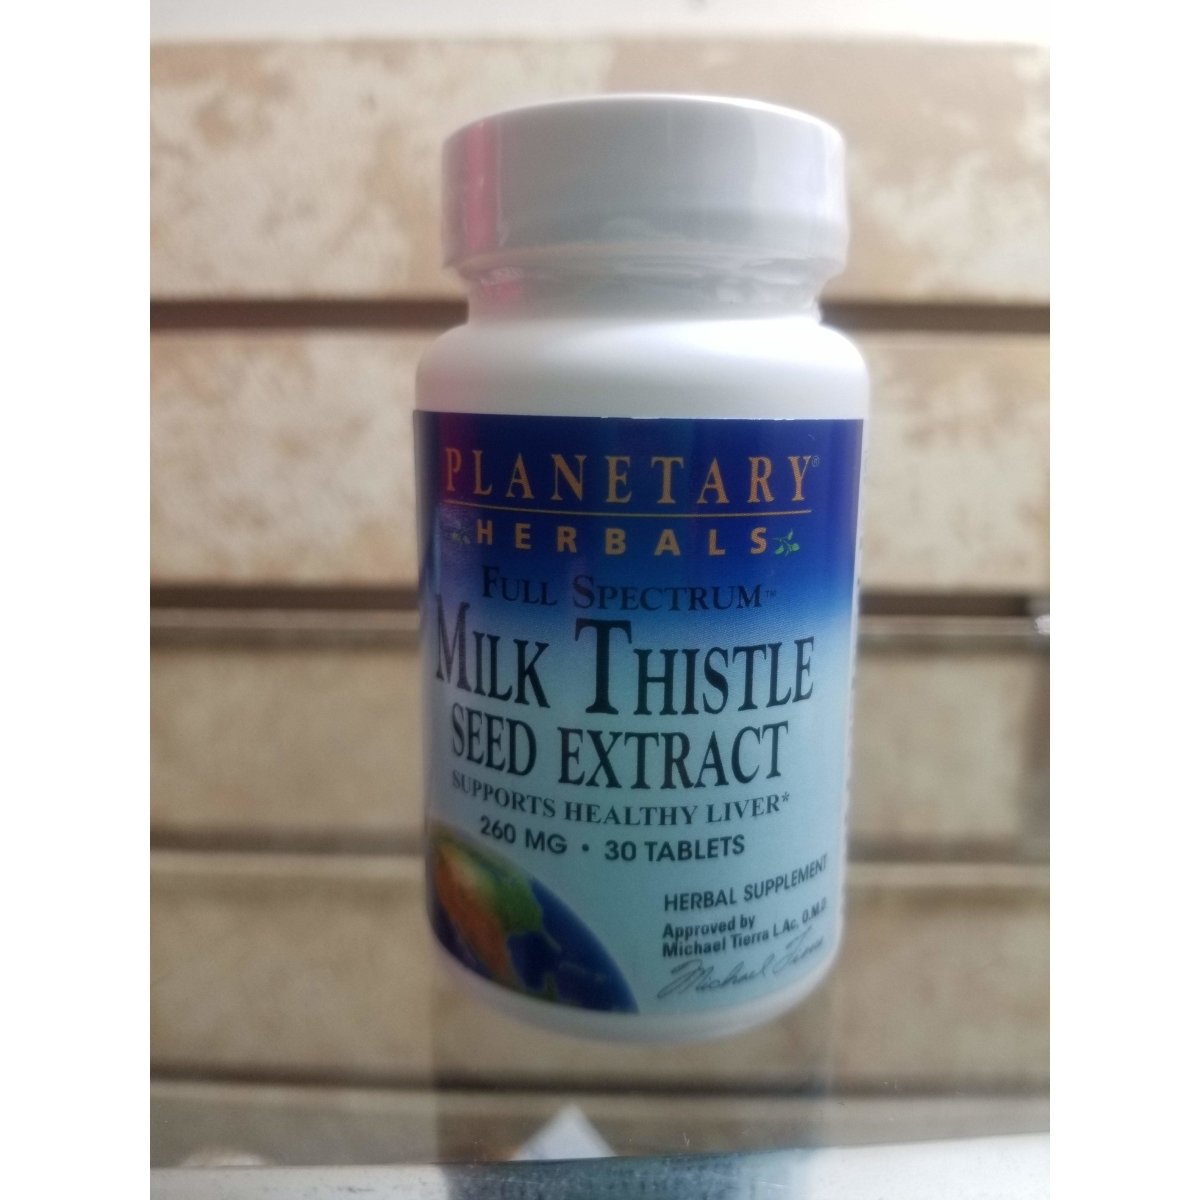 Milk Thistle Seed Extract - Full Spectrum - 30 Tablets - 260mg